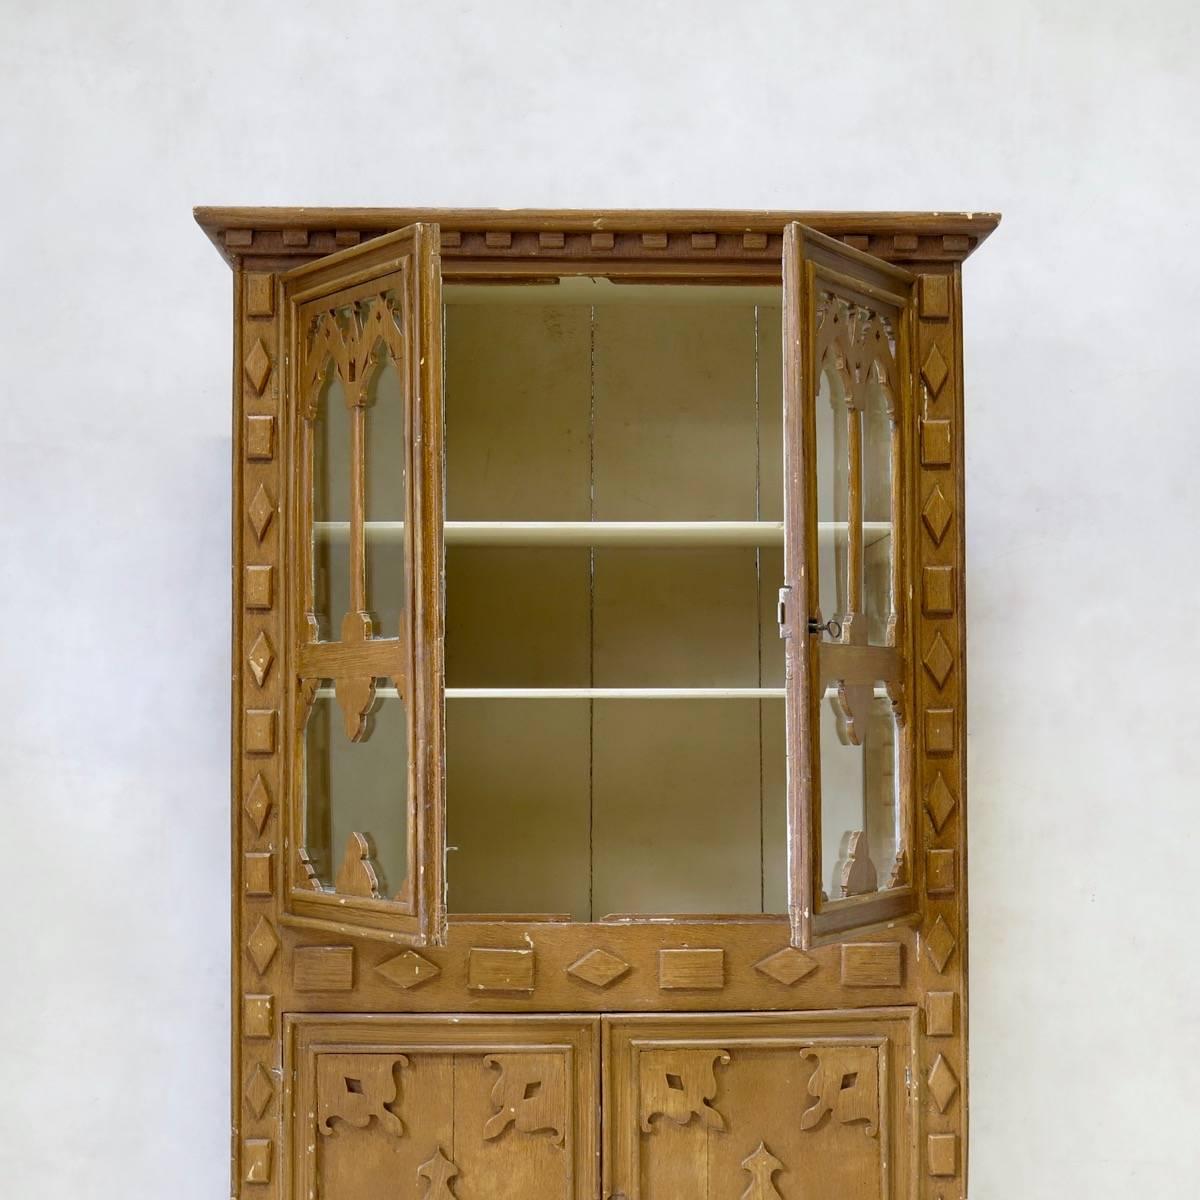 Gothic Revival Neo-Gothic Style Faux-Bois Painted Cabinet from the Jura, circa 1900s For Sale